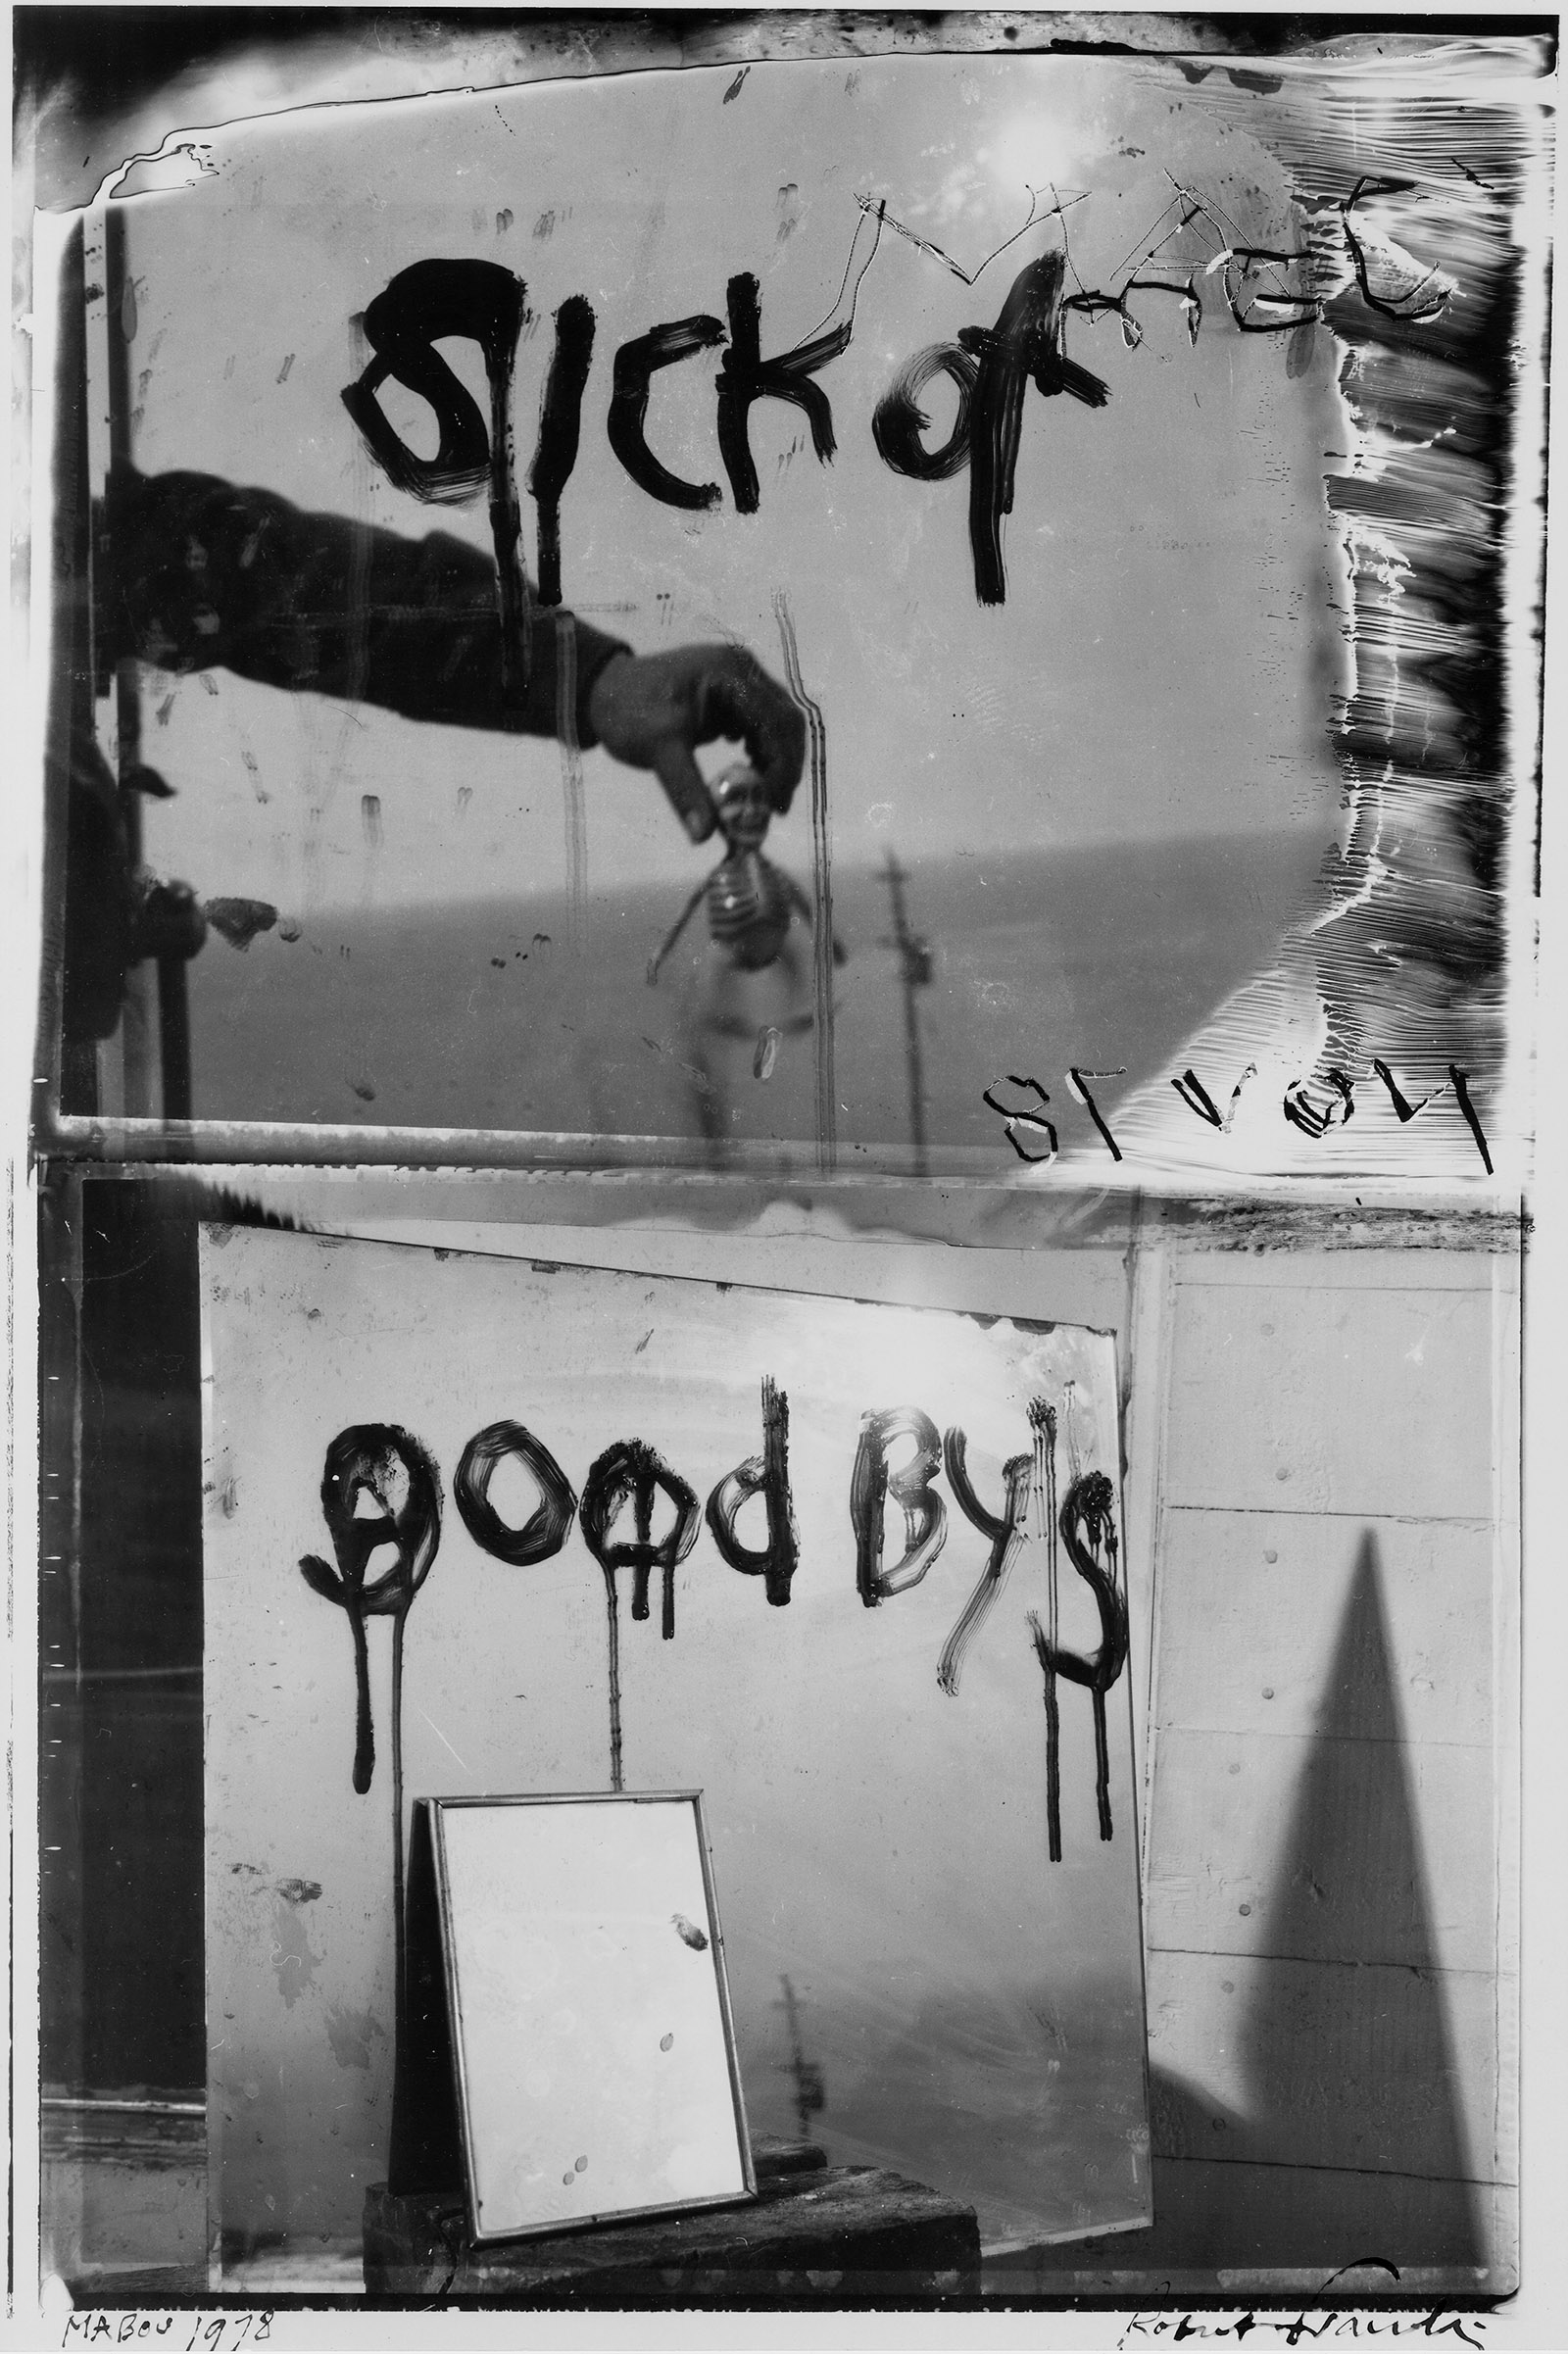 Robert Frank, "Sick of Goodby’s," 1978 (from The Lines of My Hand)